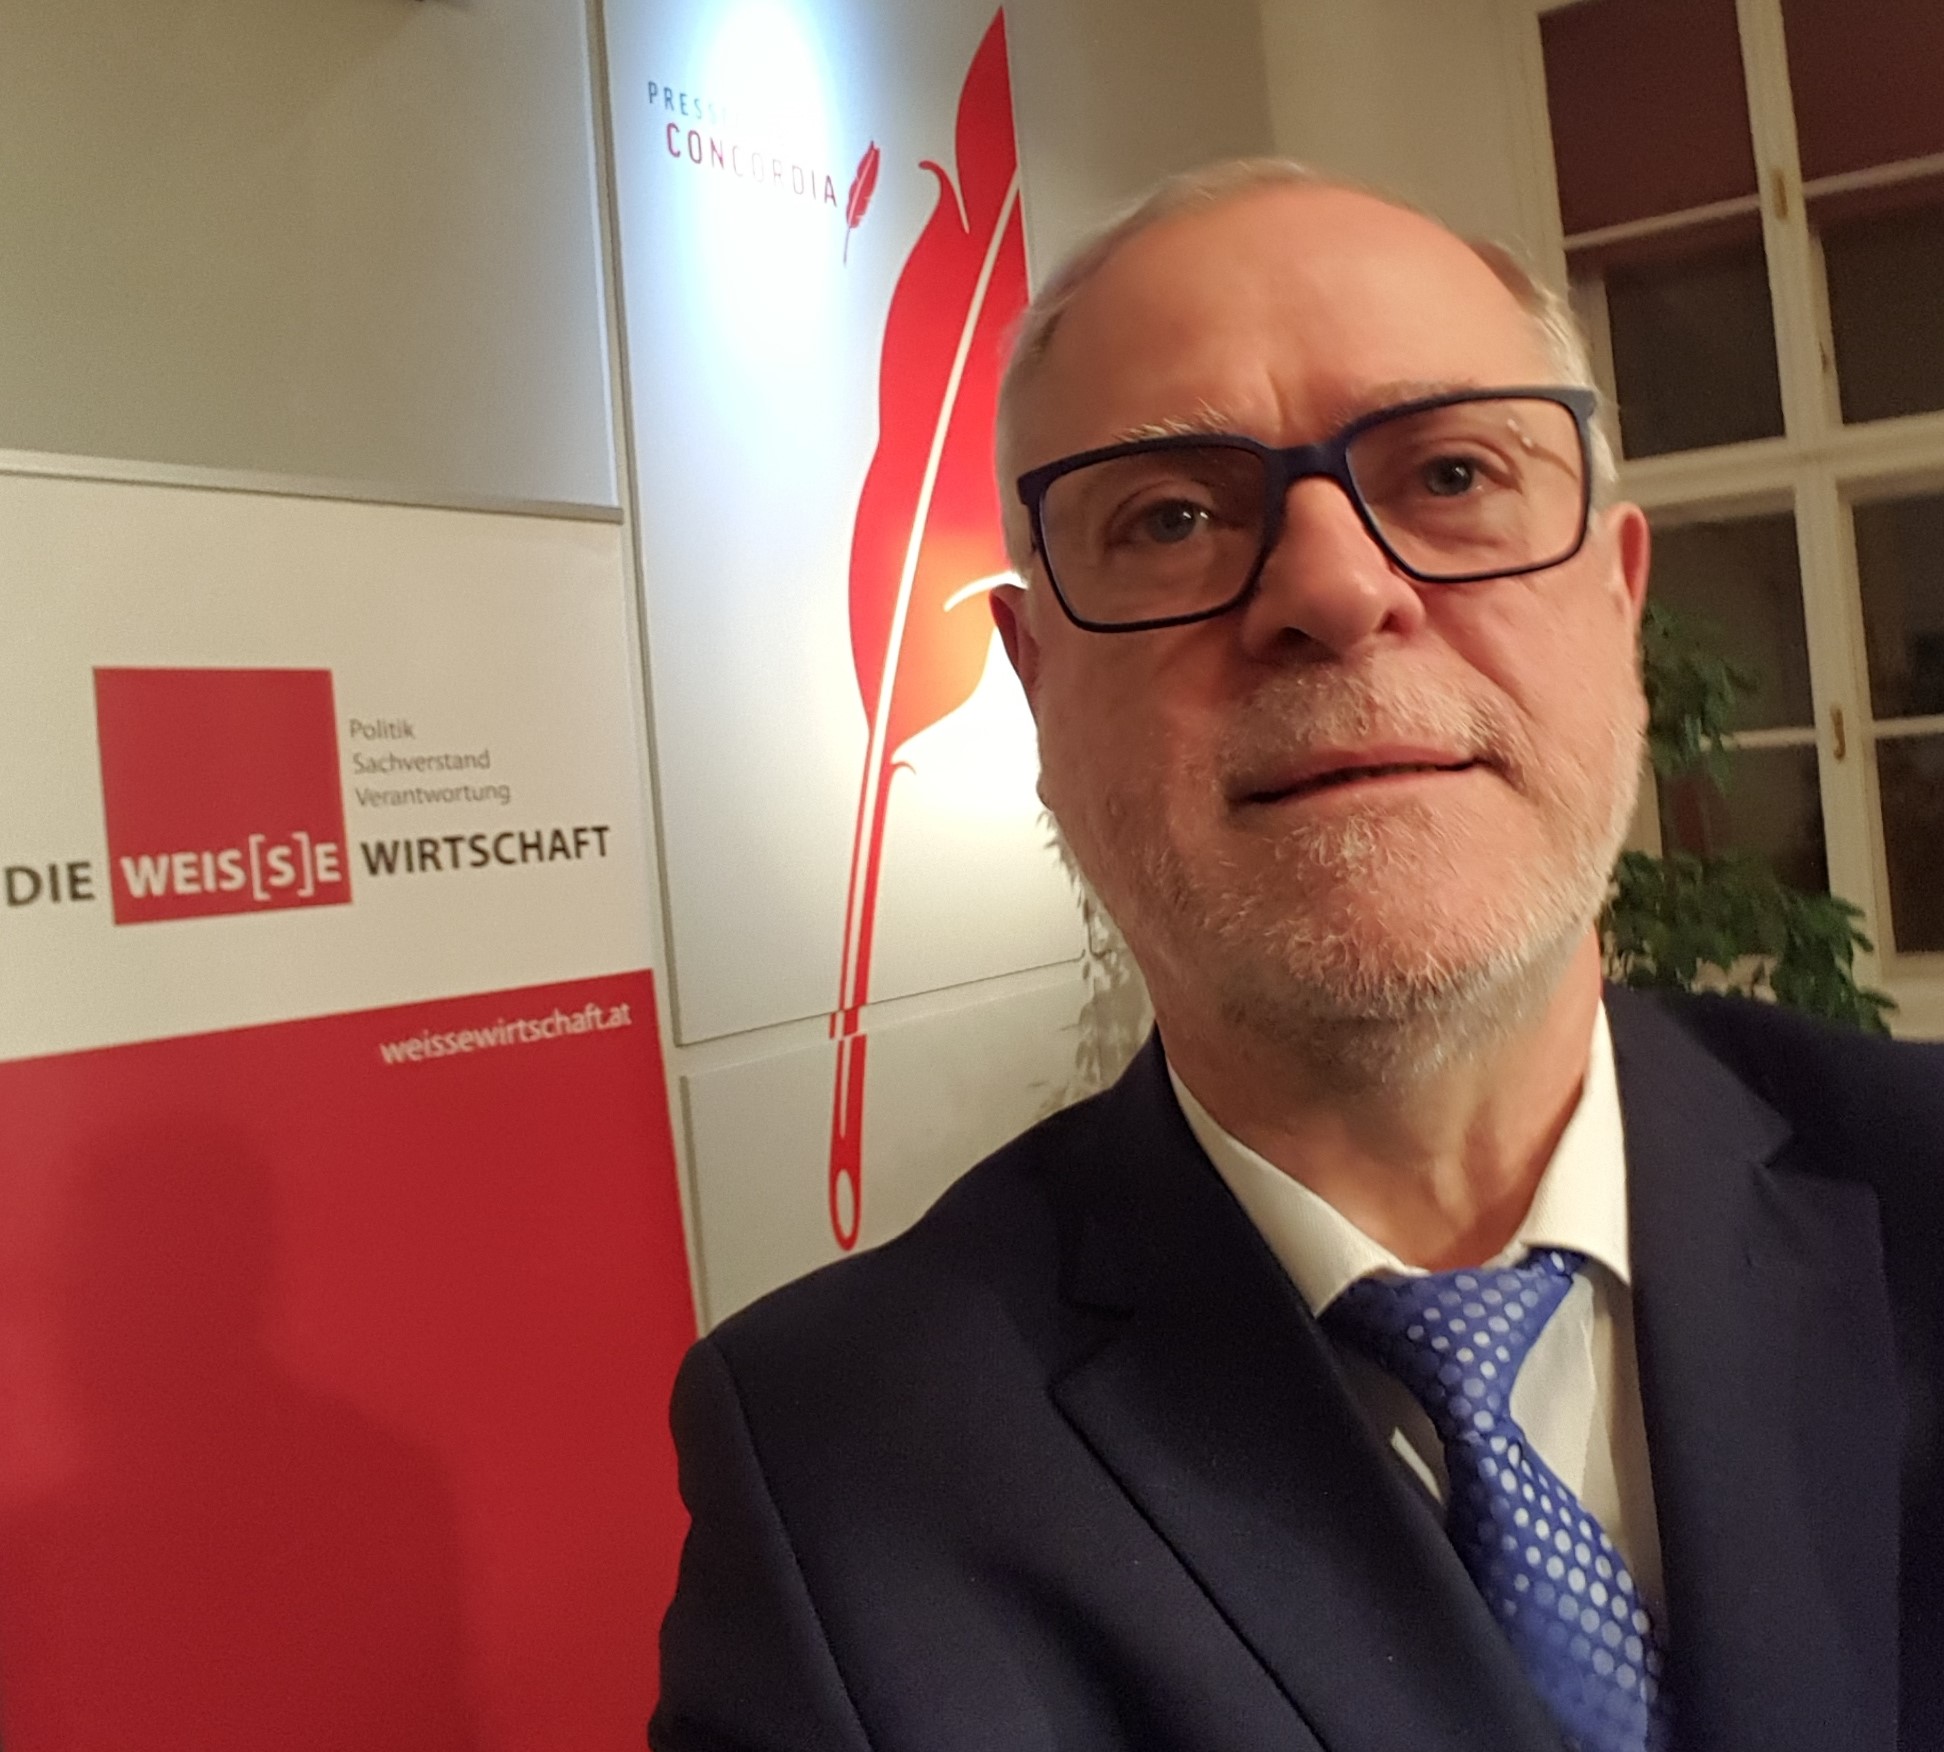 Glo President Zimmermann Spoke In Policy Panel Of Die Weis S E Wirtschaft In Vienna Evaluating The Migration And Integration Policy Objectives Of The New Austrian Government Klaus F Zimmermannklaus F Zimmermann